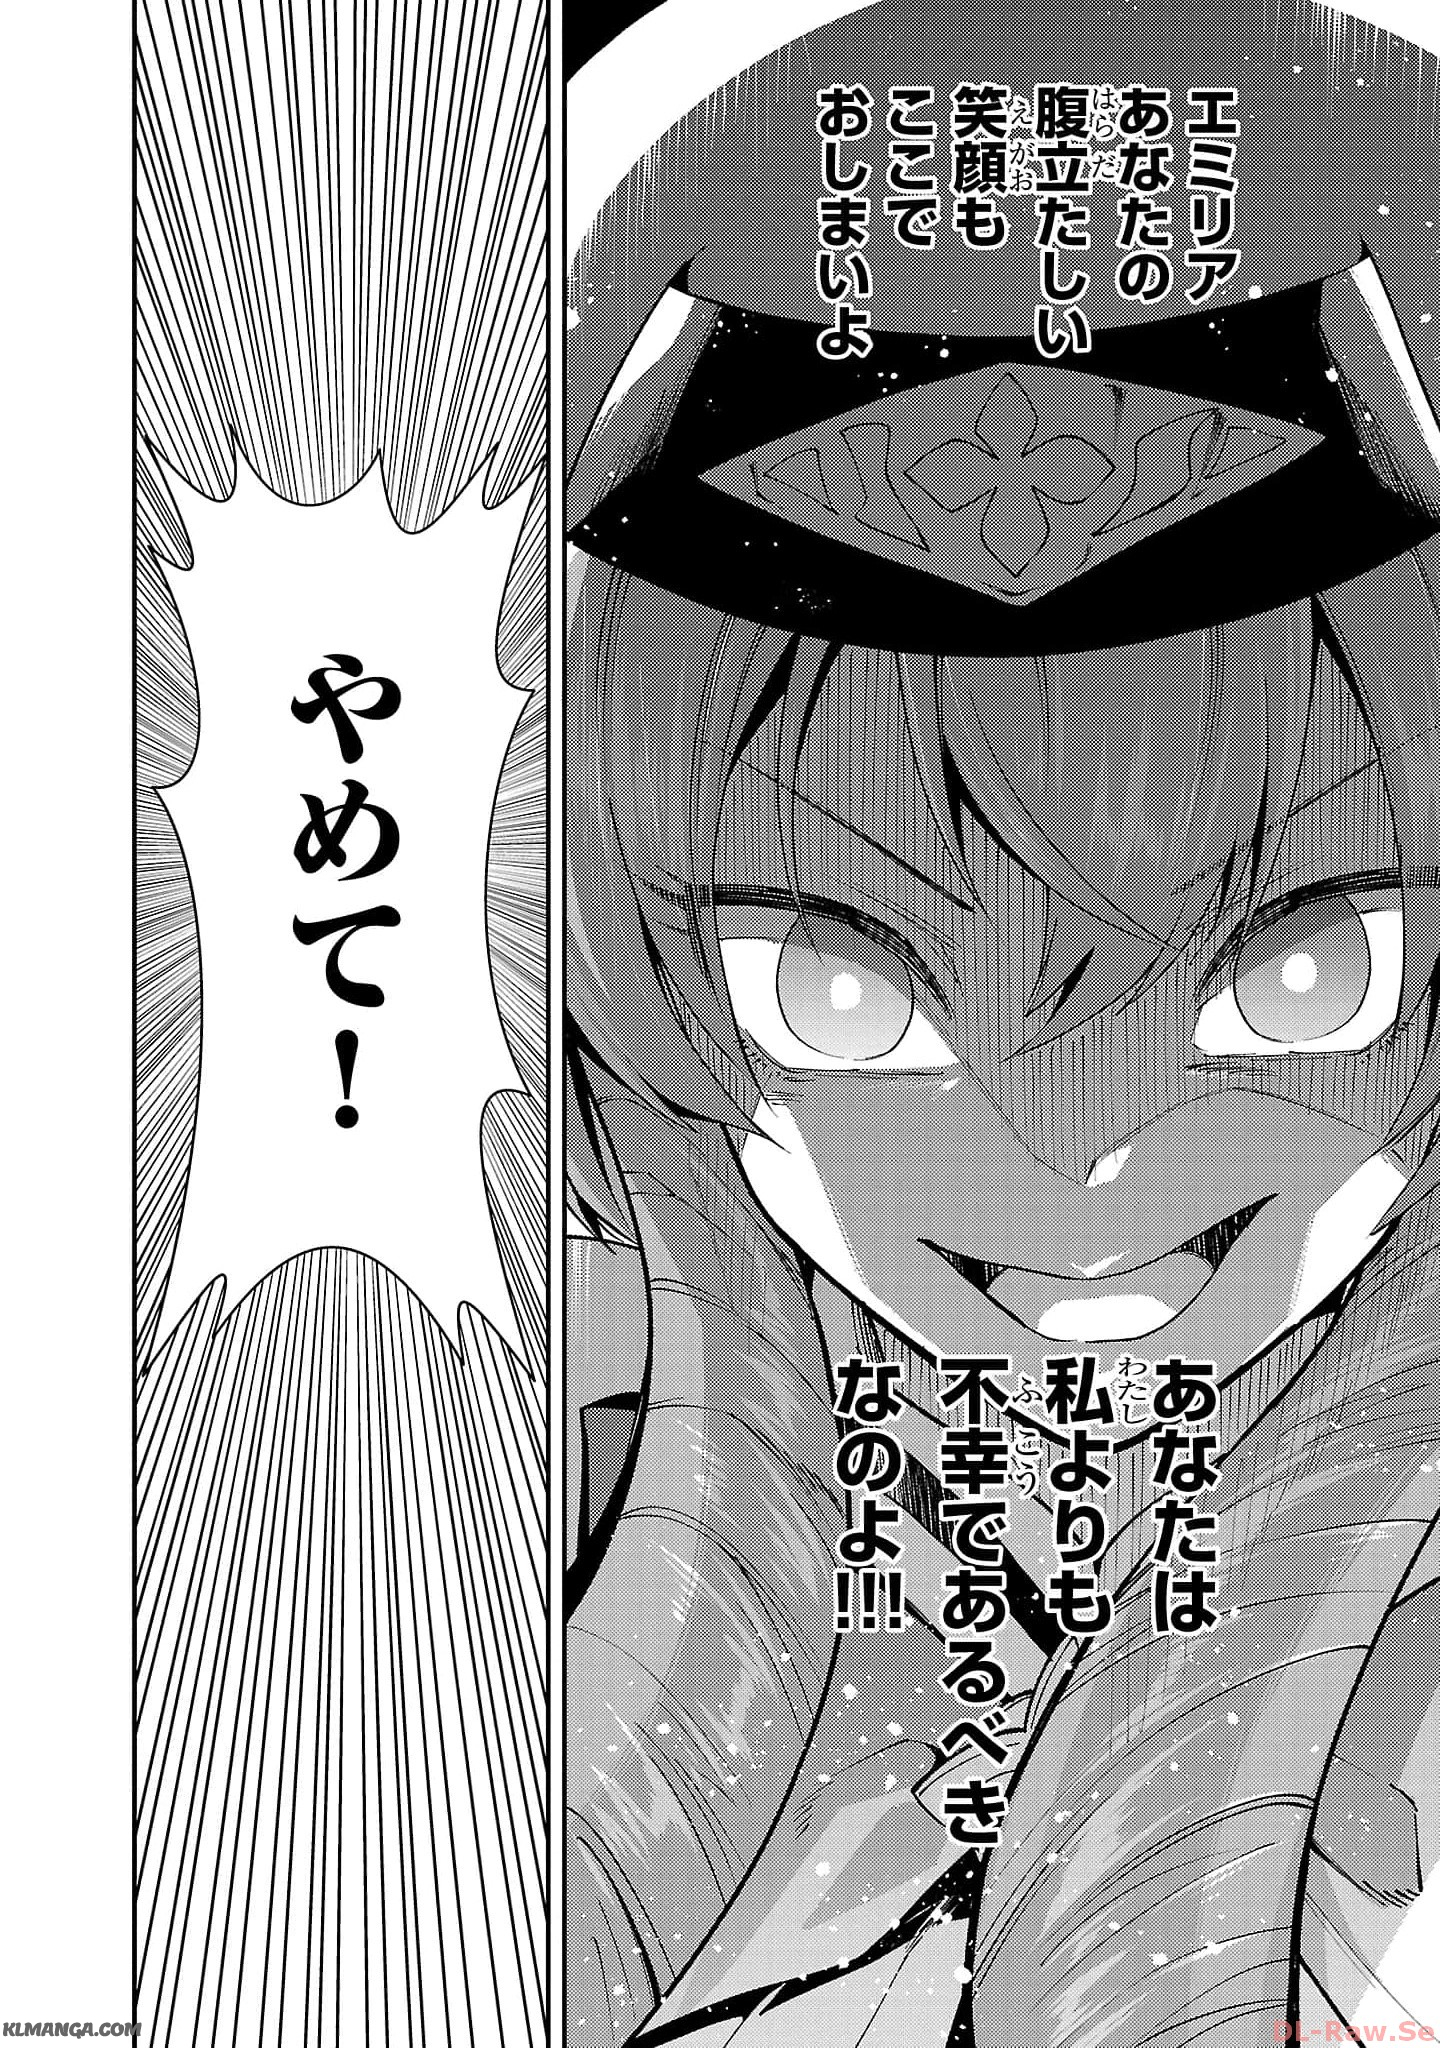 Hungry Saint and Full-Stomach Witch’s Slow Life in Another World! 腹ペコ聖女とまんぷく魔女の異世界スローライフ! 第21話 - Page 22